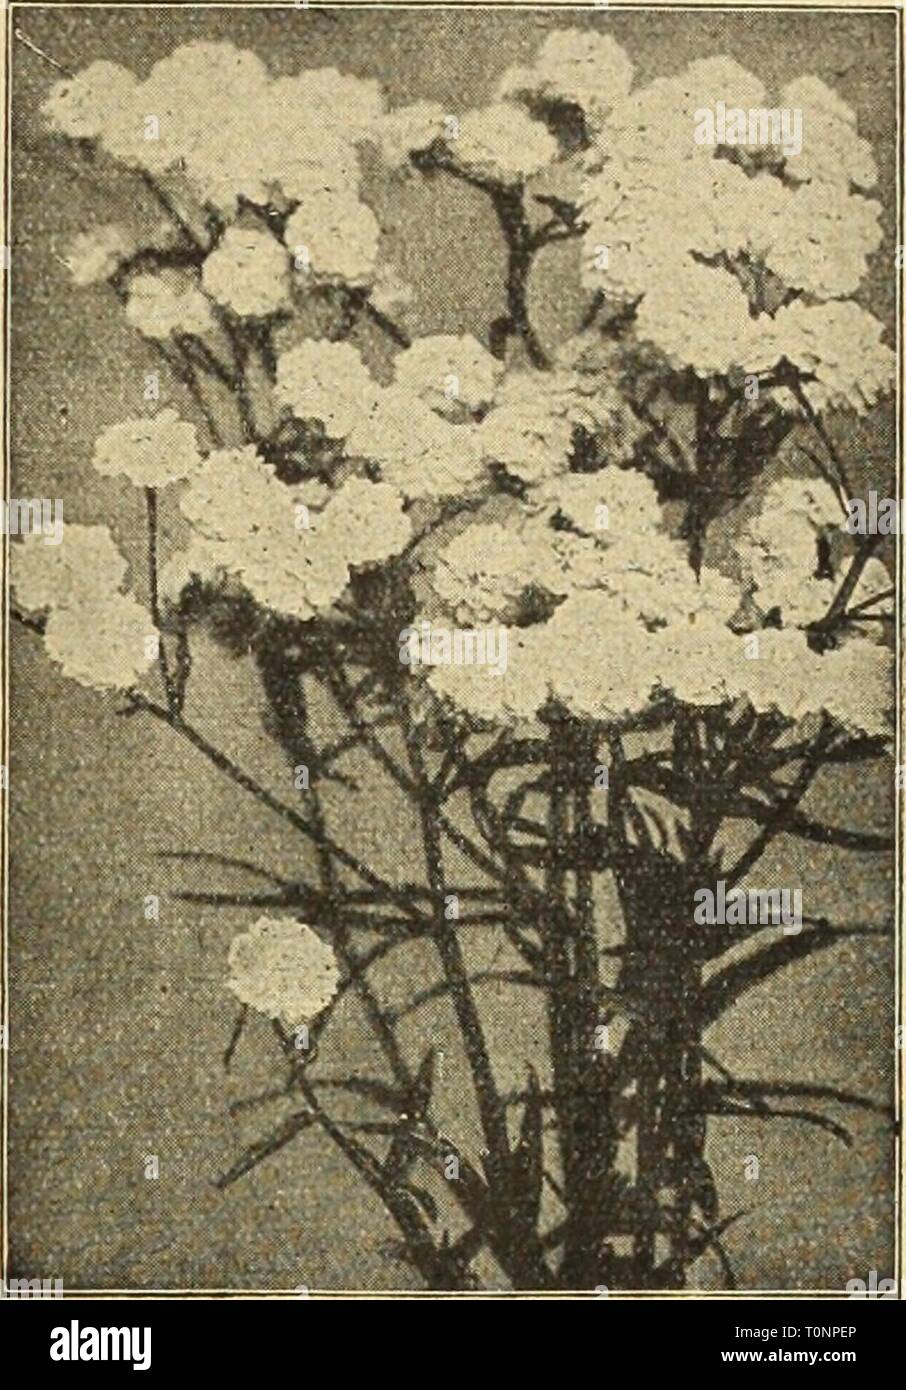 Dreer's autumn catalogue 1926 (1926) Dreer's autumn catalogue 1926  dreersautumncata1926henr Year: 1926  Achillea Ptarmica Fl. Pl. The Pearl ACONITUM AcOnitUm (Monkshood or Helmet Flower) Aconites form bushy clumps, and are invaluable for planting under trees or in shady or semi- shady positions. Fischeri. A dwarf variety growing 18 inches high, with very large pale blue flowers in September and October. '^1^ Sparks' Variety. The darkest blue of all; 30 inches high; flowers in June. 35 cts. each; $3.50 per doz.; $25.00 per 100. AjUga (Bugle) ,. A useful plant for the rockery and for carpeting  Stock Photo